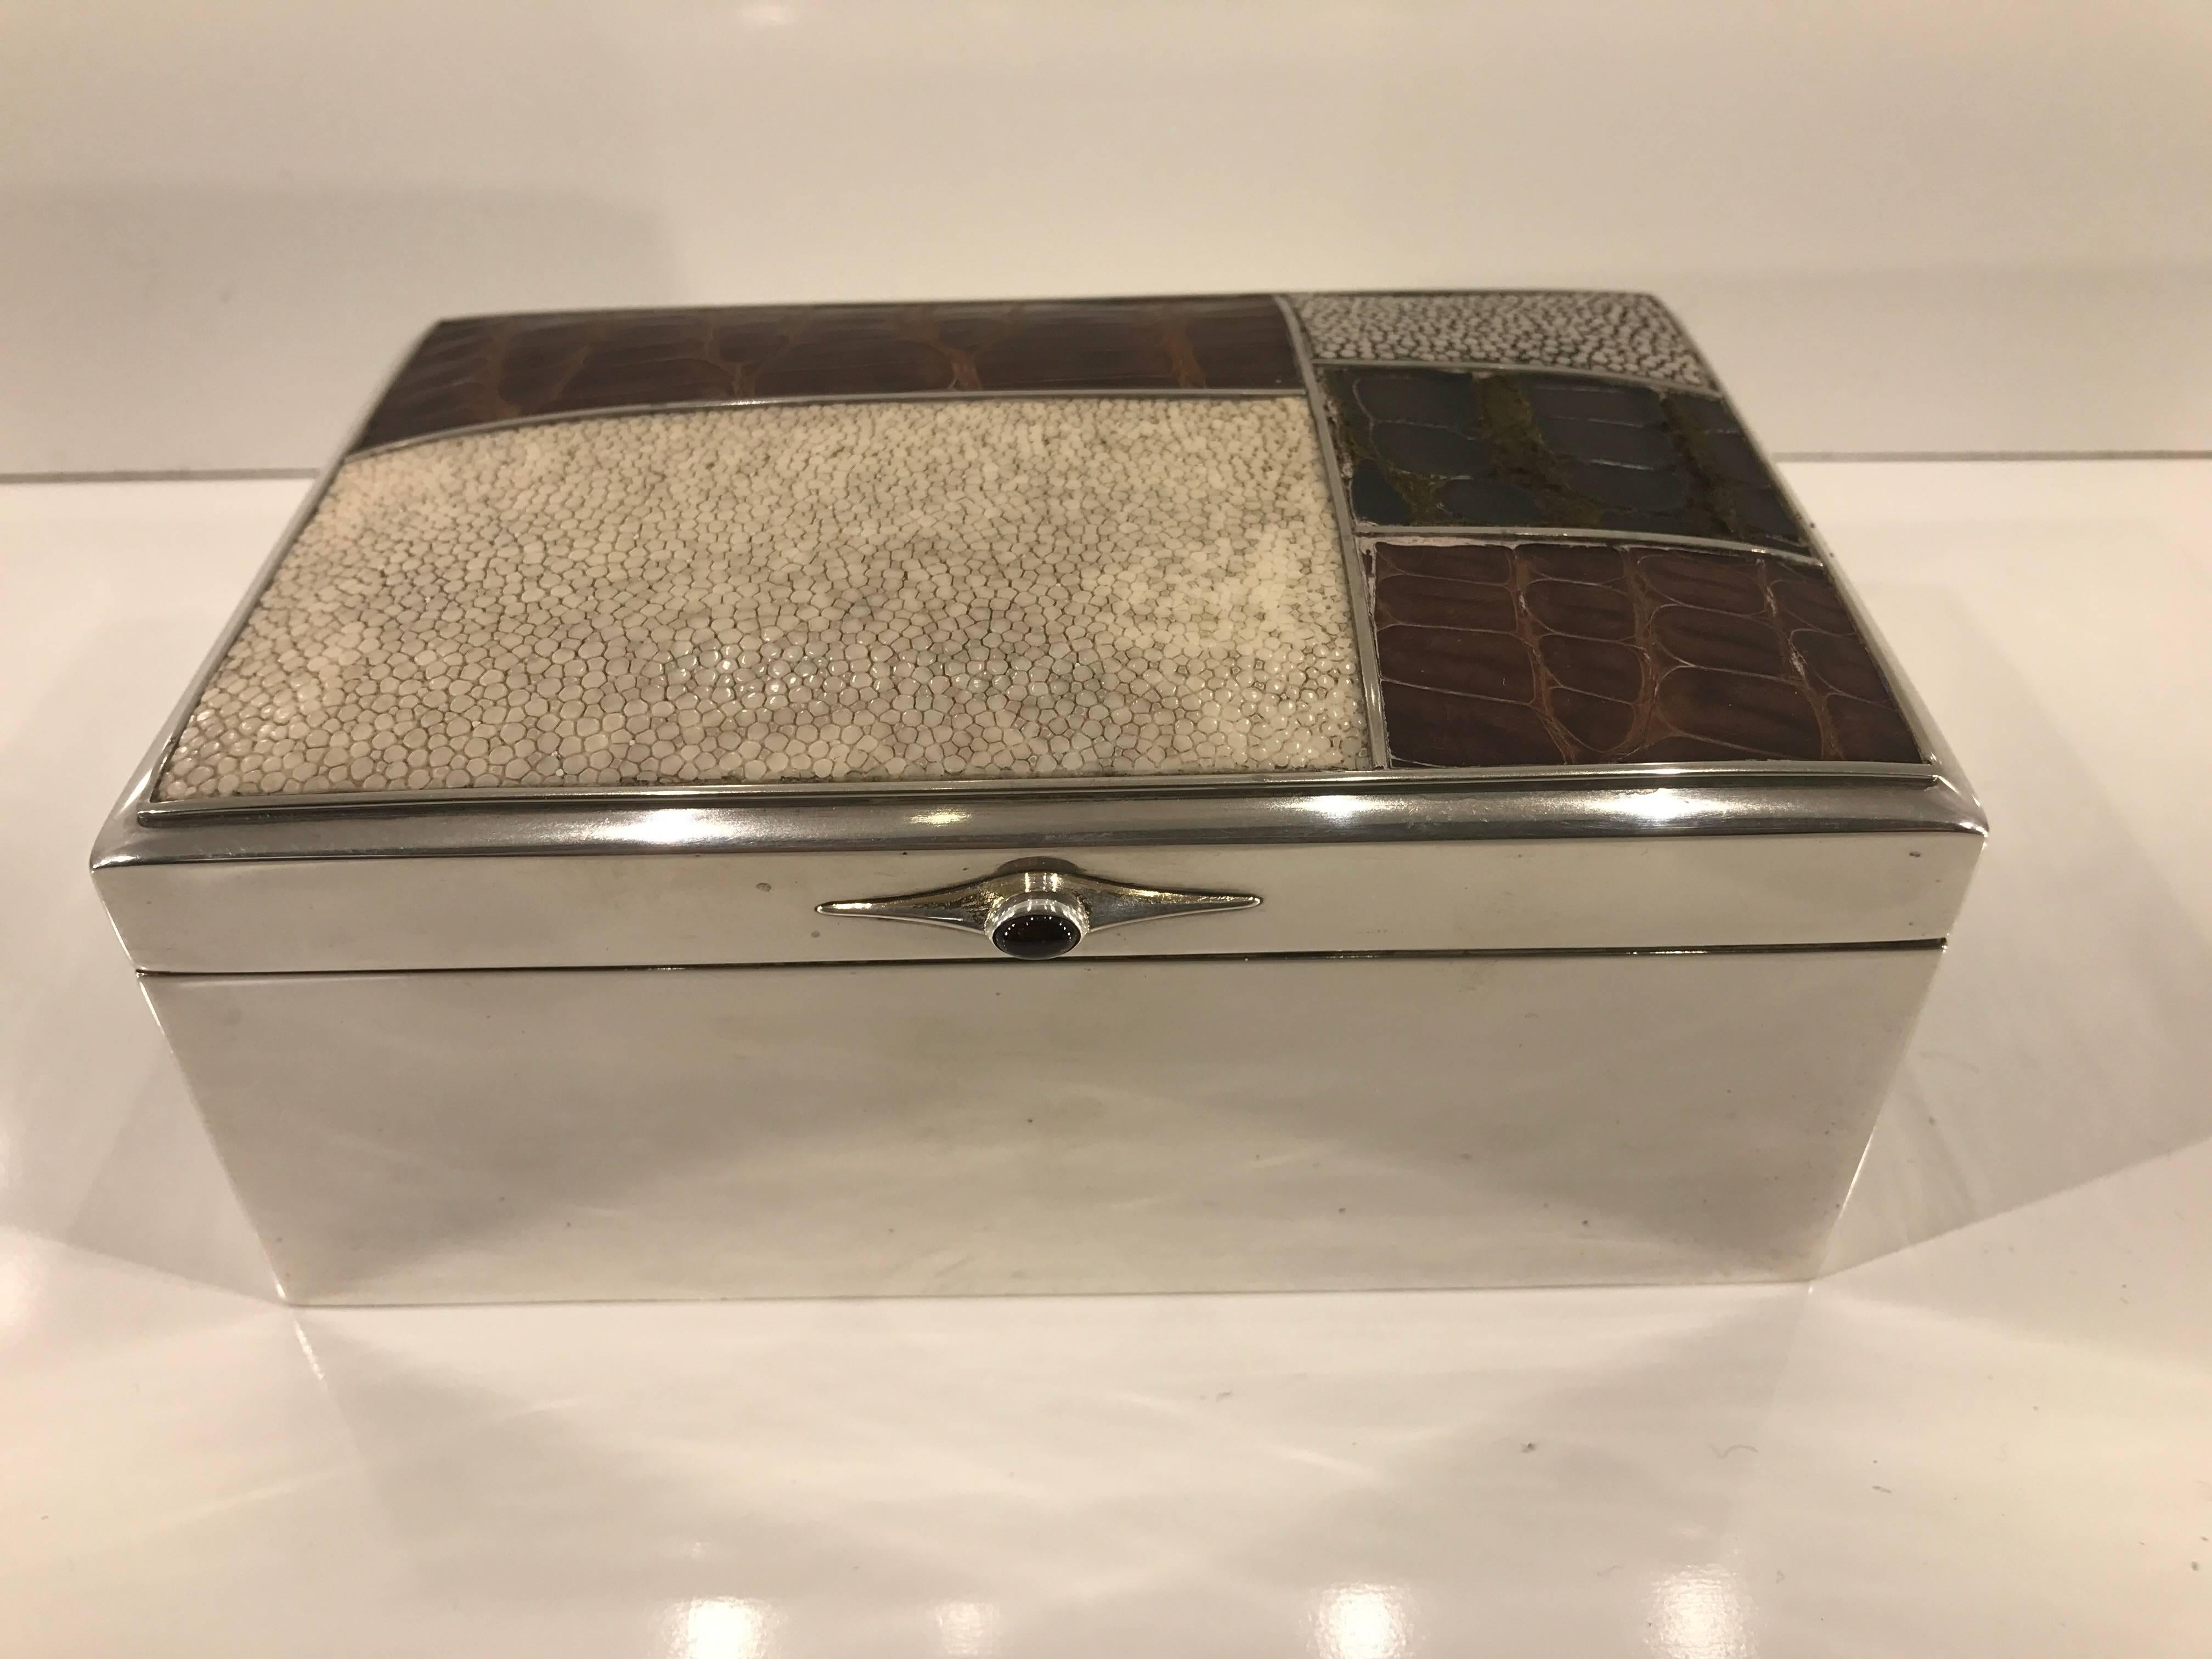 Scandinavian Modern sterling shagreen & alligator box, by David Anderson, 1966. Sterling mounted specimen white and gray Shagreen, beautiful smooth natural geometric patterns. Complimented by balck and rich mahogany inset alligator panels. The lift